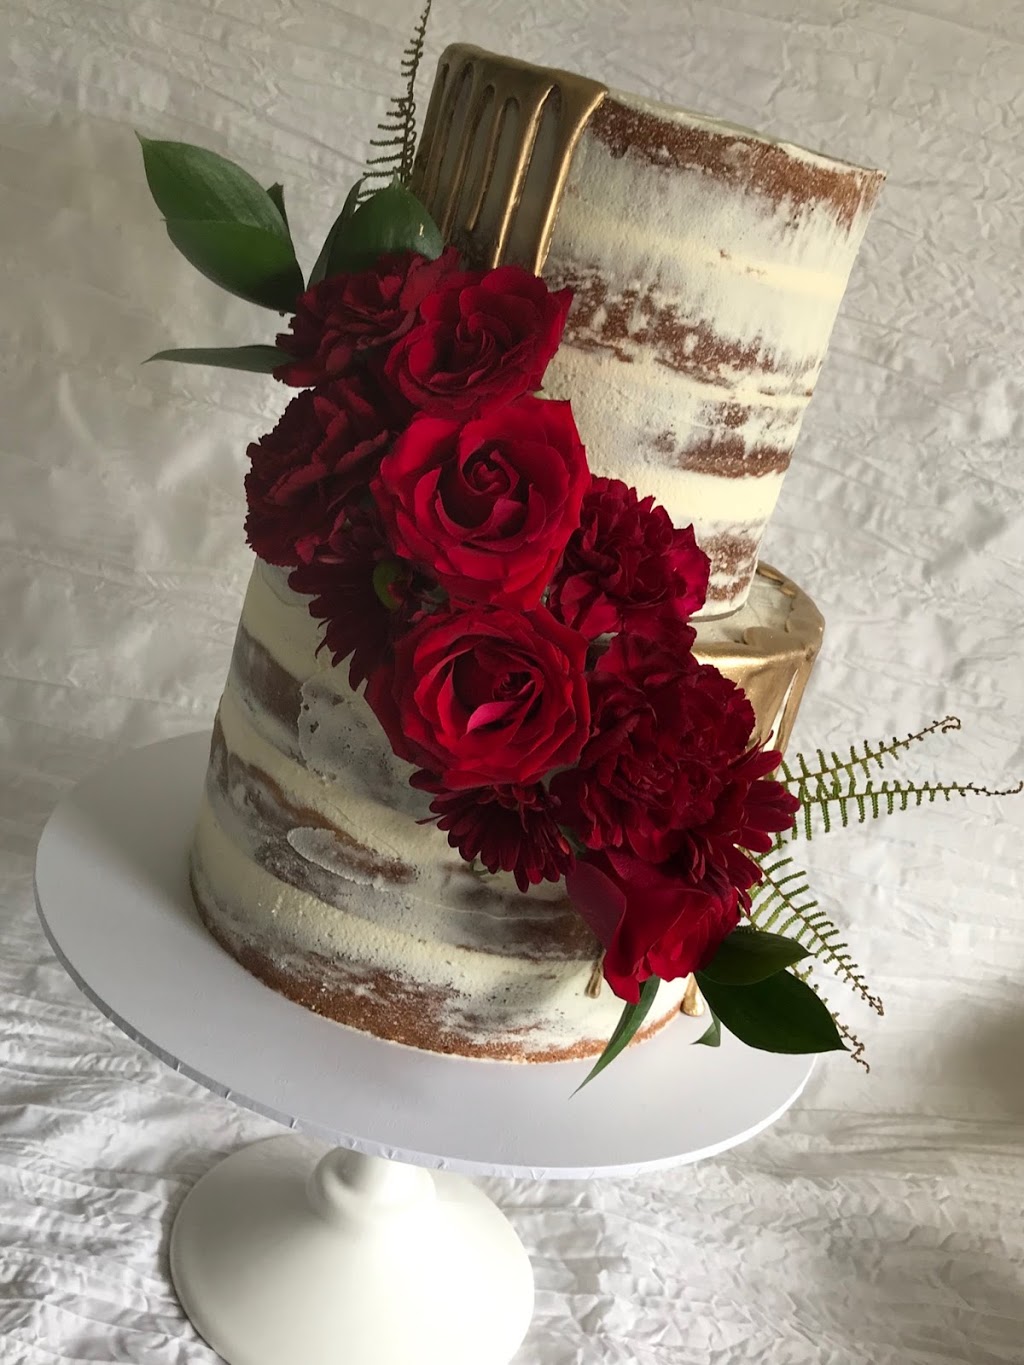 Queen of Cakes | bakery | 10 Patchouli Cir, Atwell WA 6164, Australia | 0406070633 OR +61 406 070 633